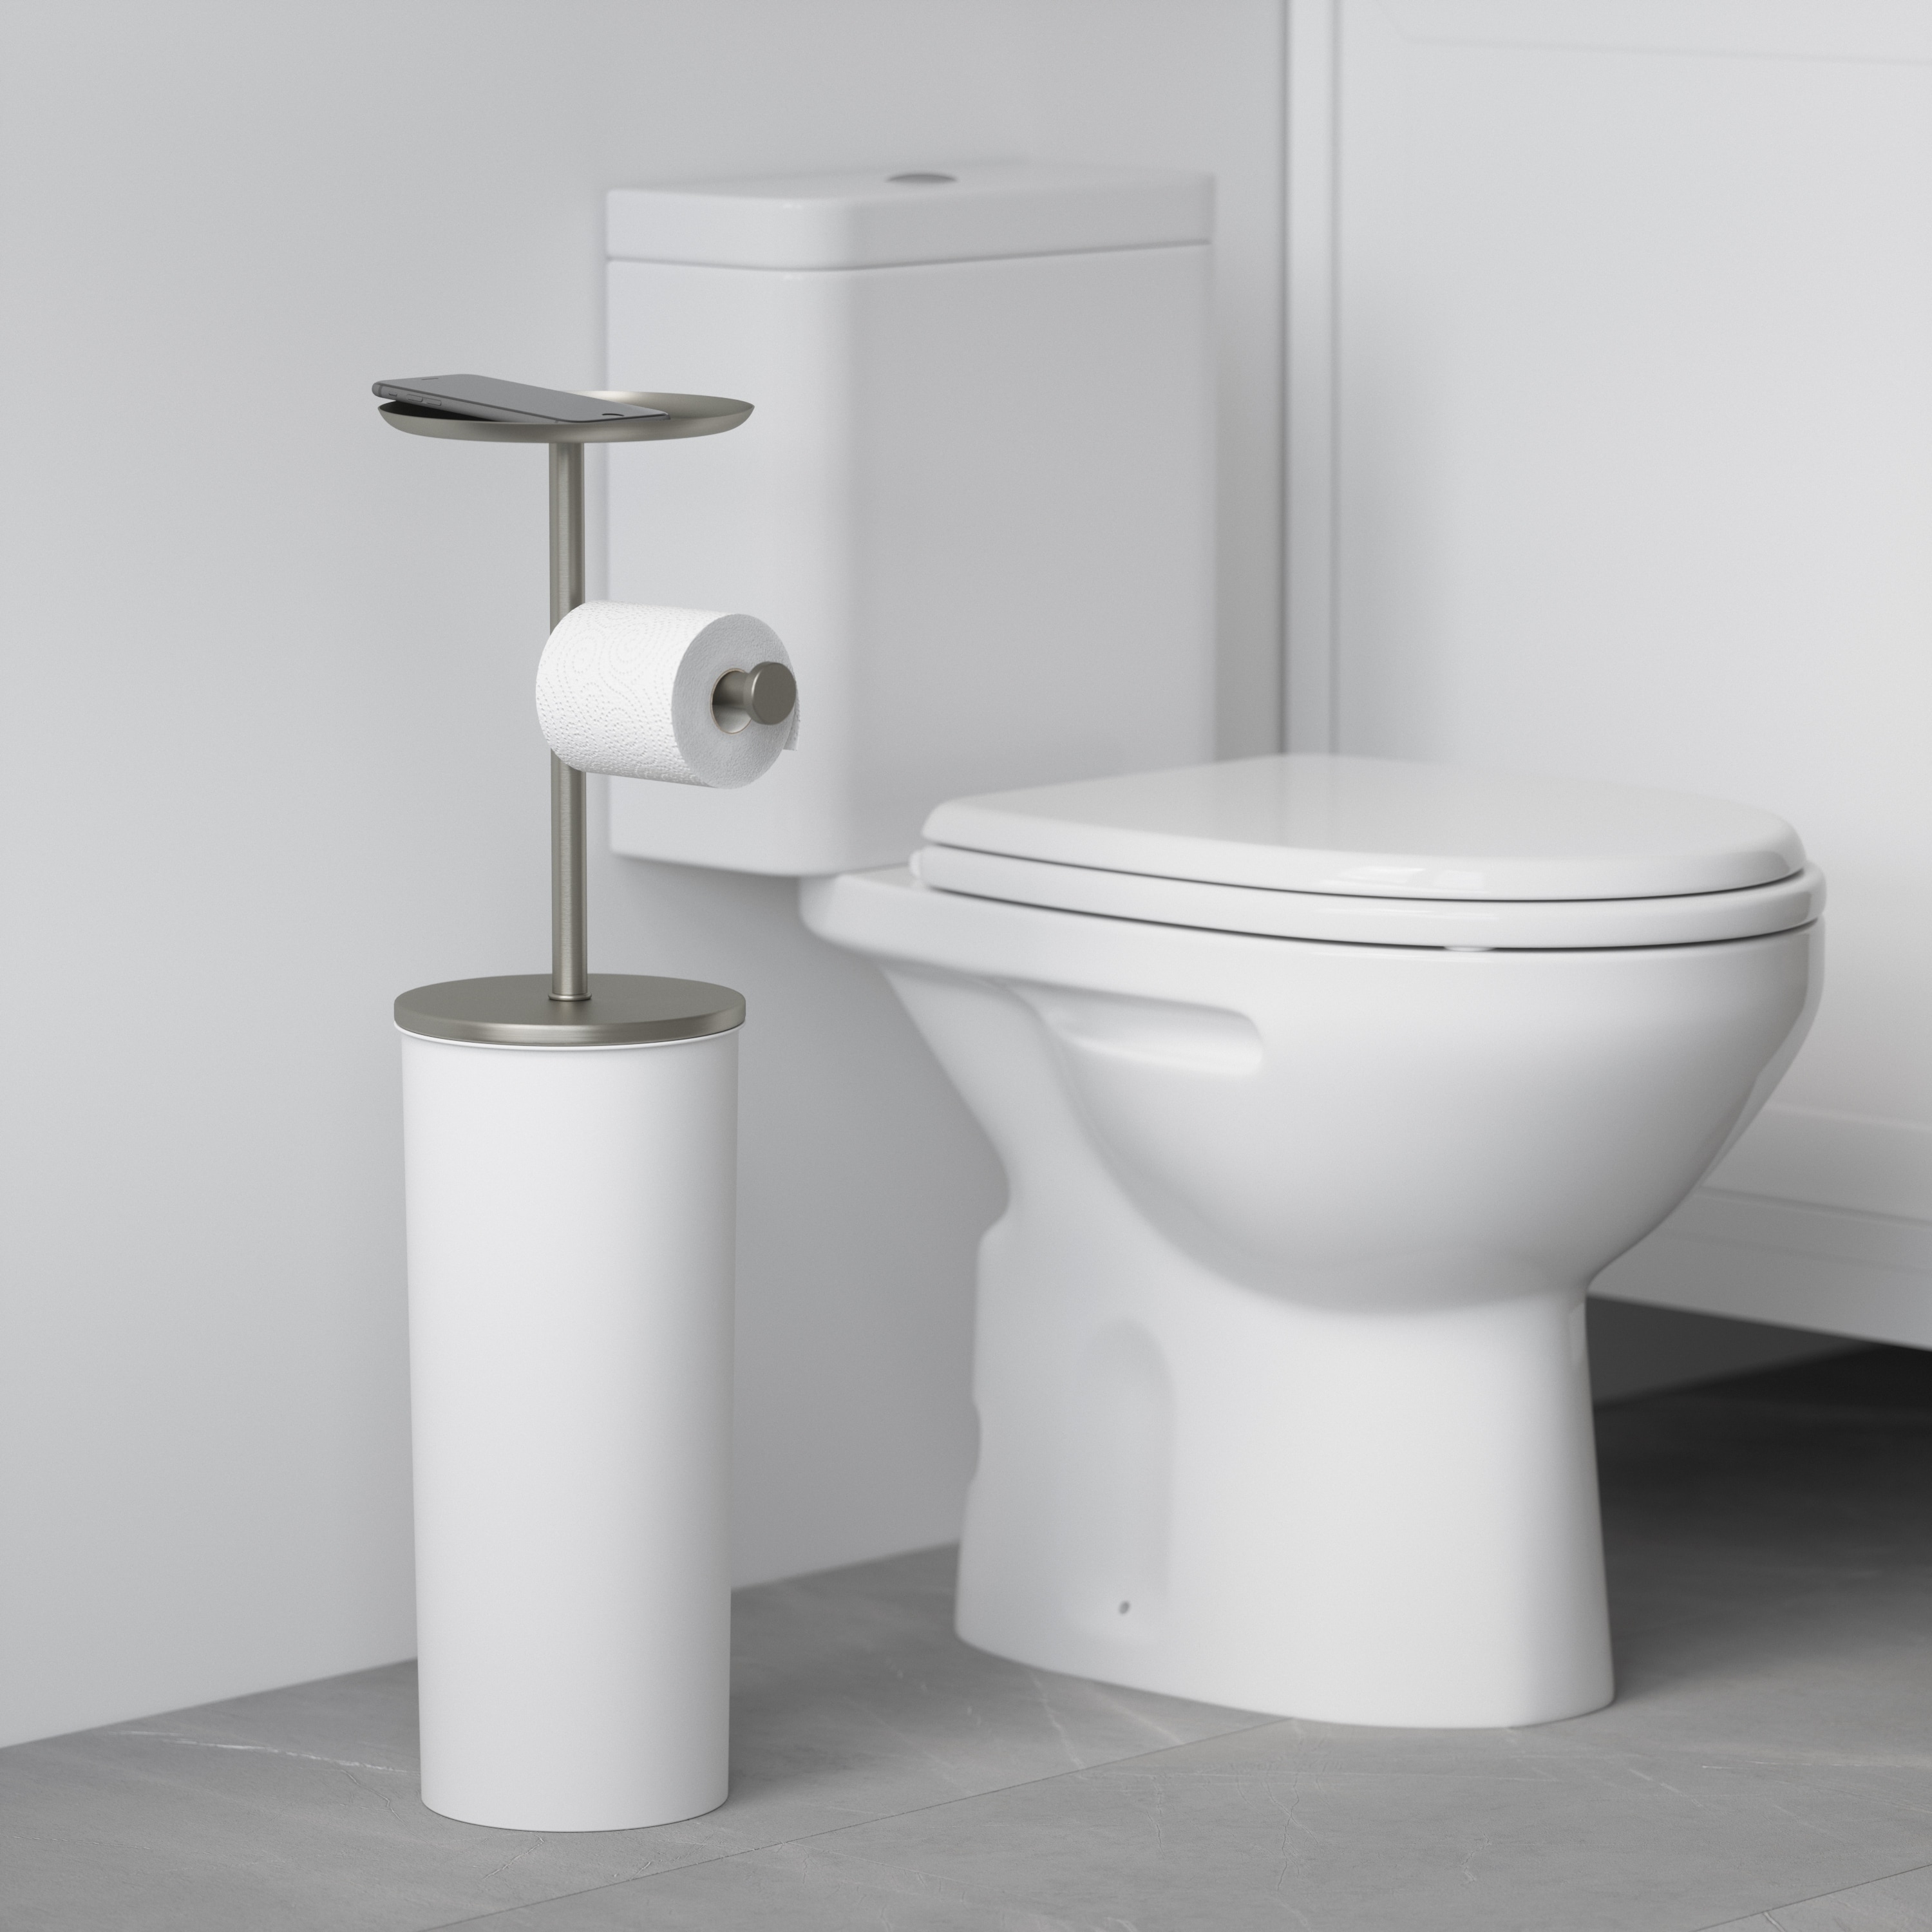 https://ak1.ostkcdn.com/images/products/31047547/Portaloo-Toilet-Paper-Stand-White-Nickel-05c704bf-ae43-4473-a023-a9c7306ed9ad.jpg